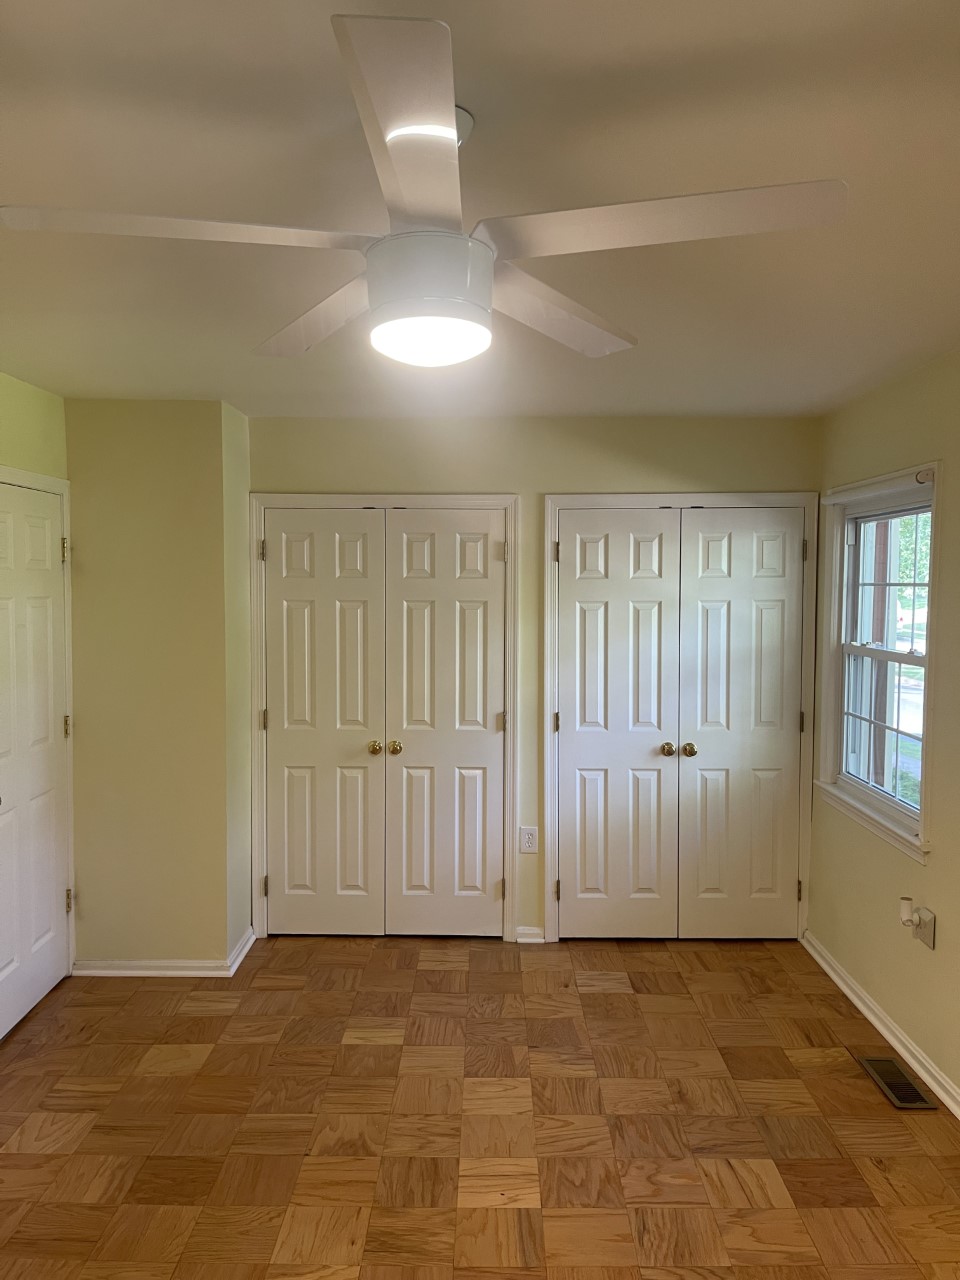 Upstairs Master bedroom with brand new ceiling Fan with remote control